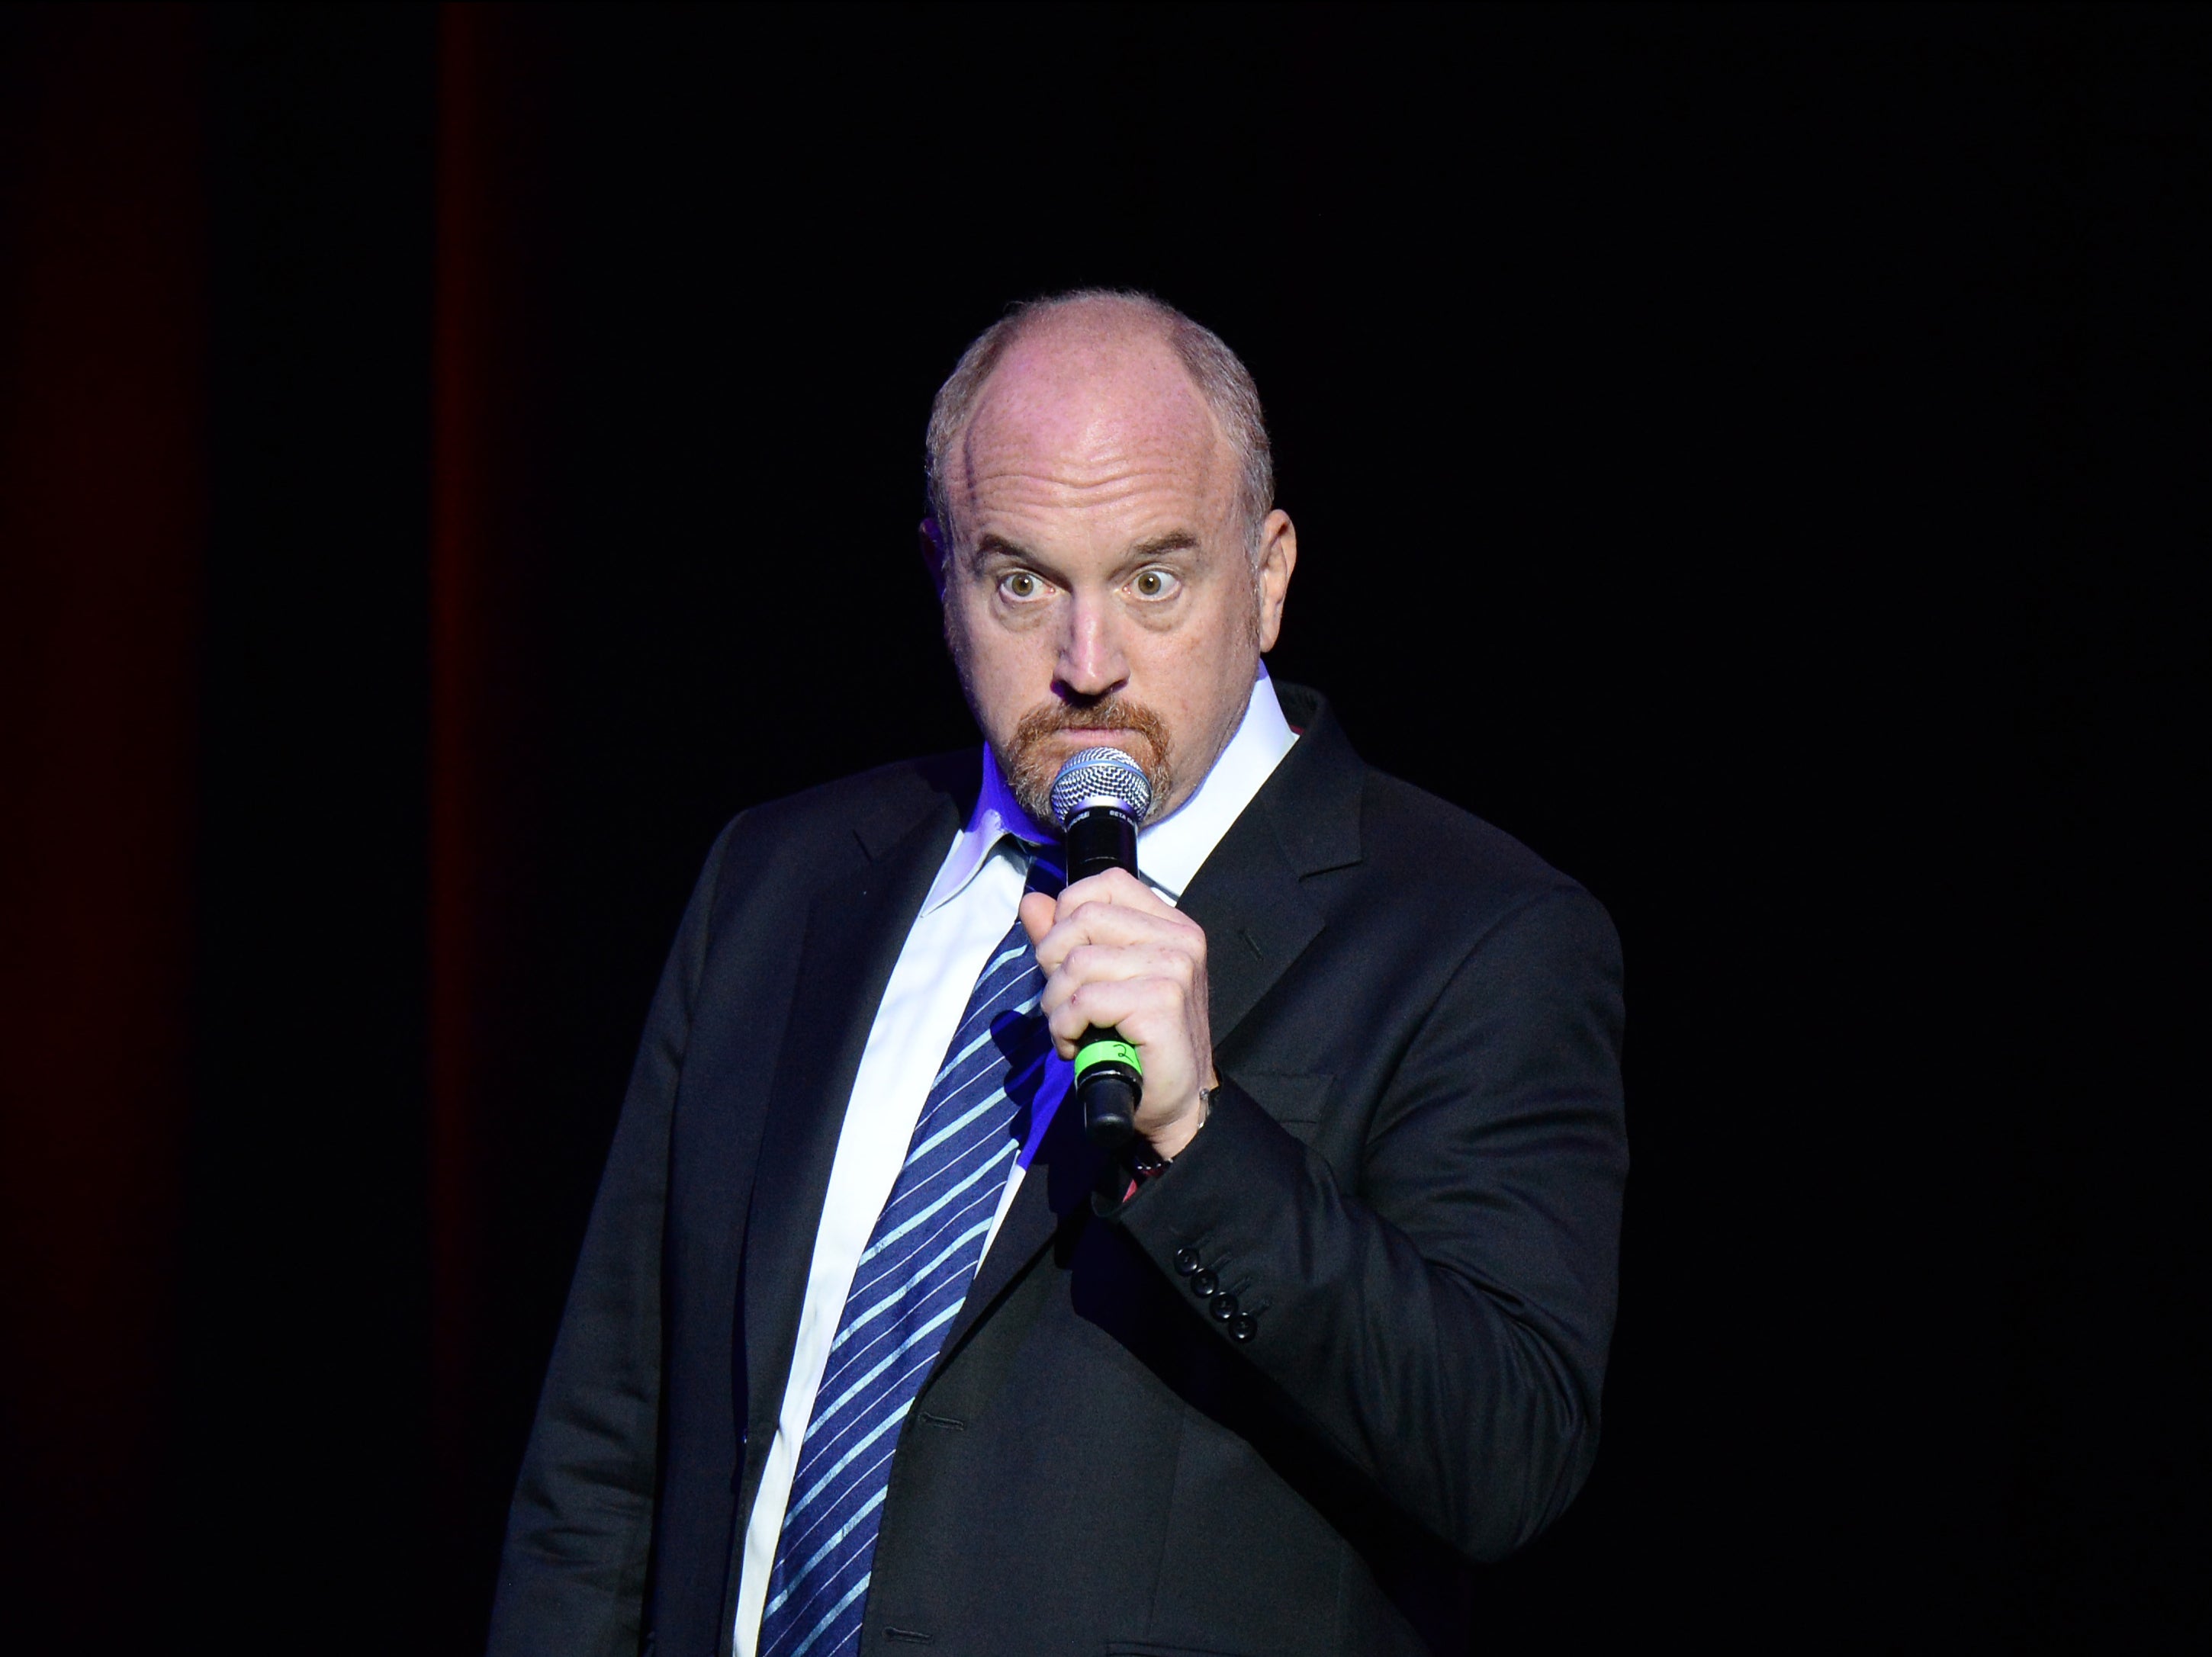 Louis CK has been attempting to come back to live comedy in the years since his sexual misconduct scandal